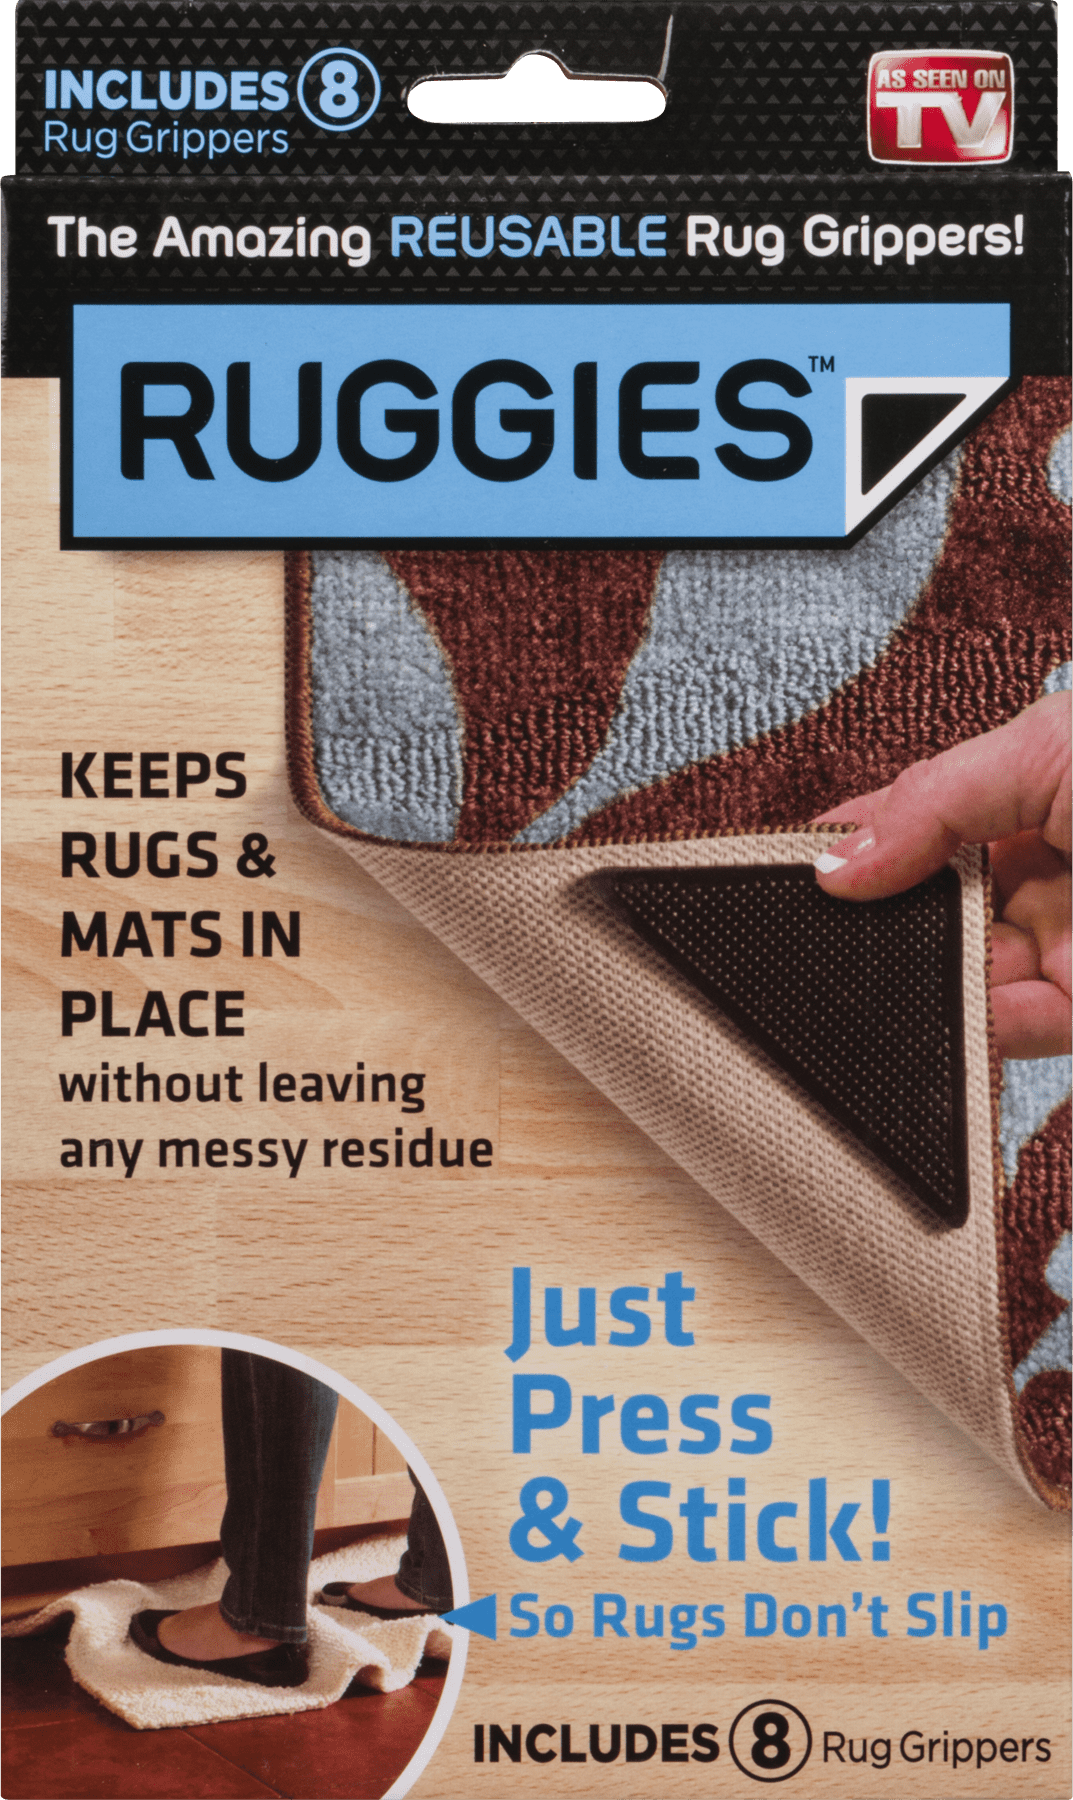 Ruggies As Seen On TV Rug Gripper Stopper Rug Pad Ruggy Washable Carpet Pad  Floor Gripper Suction Grip Stopper Corner Carpet Holder Include 8 Adhesive